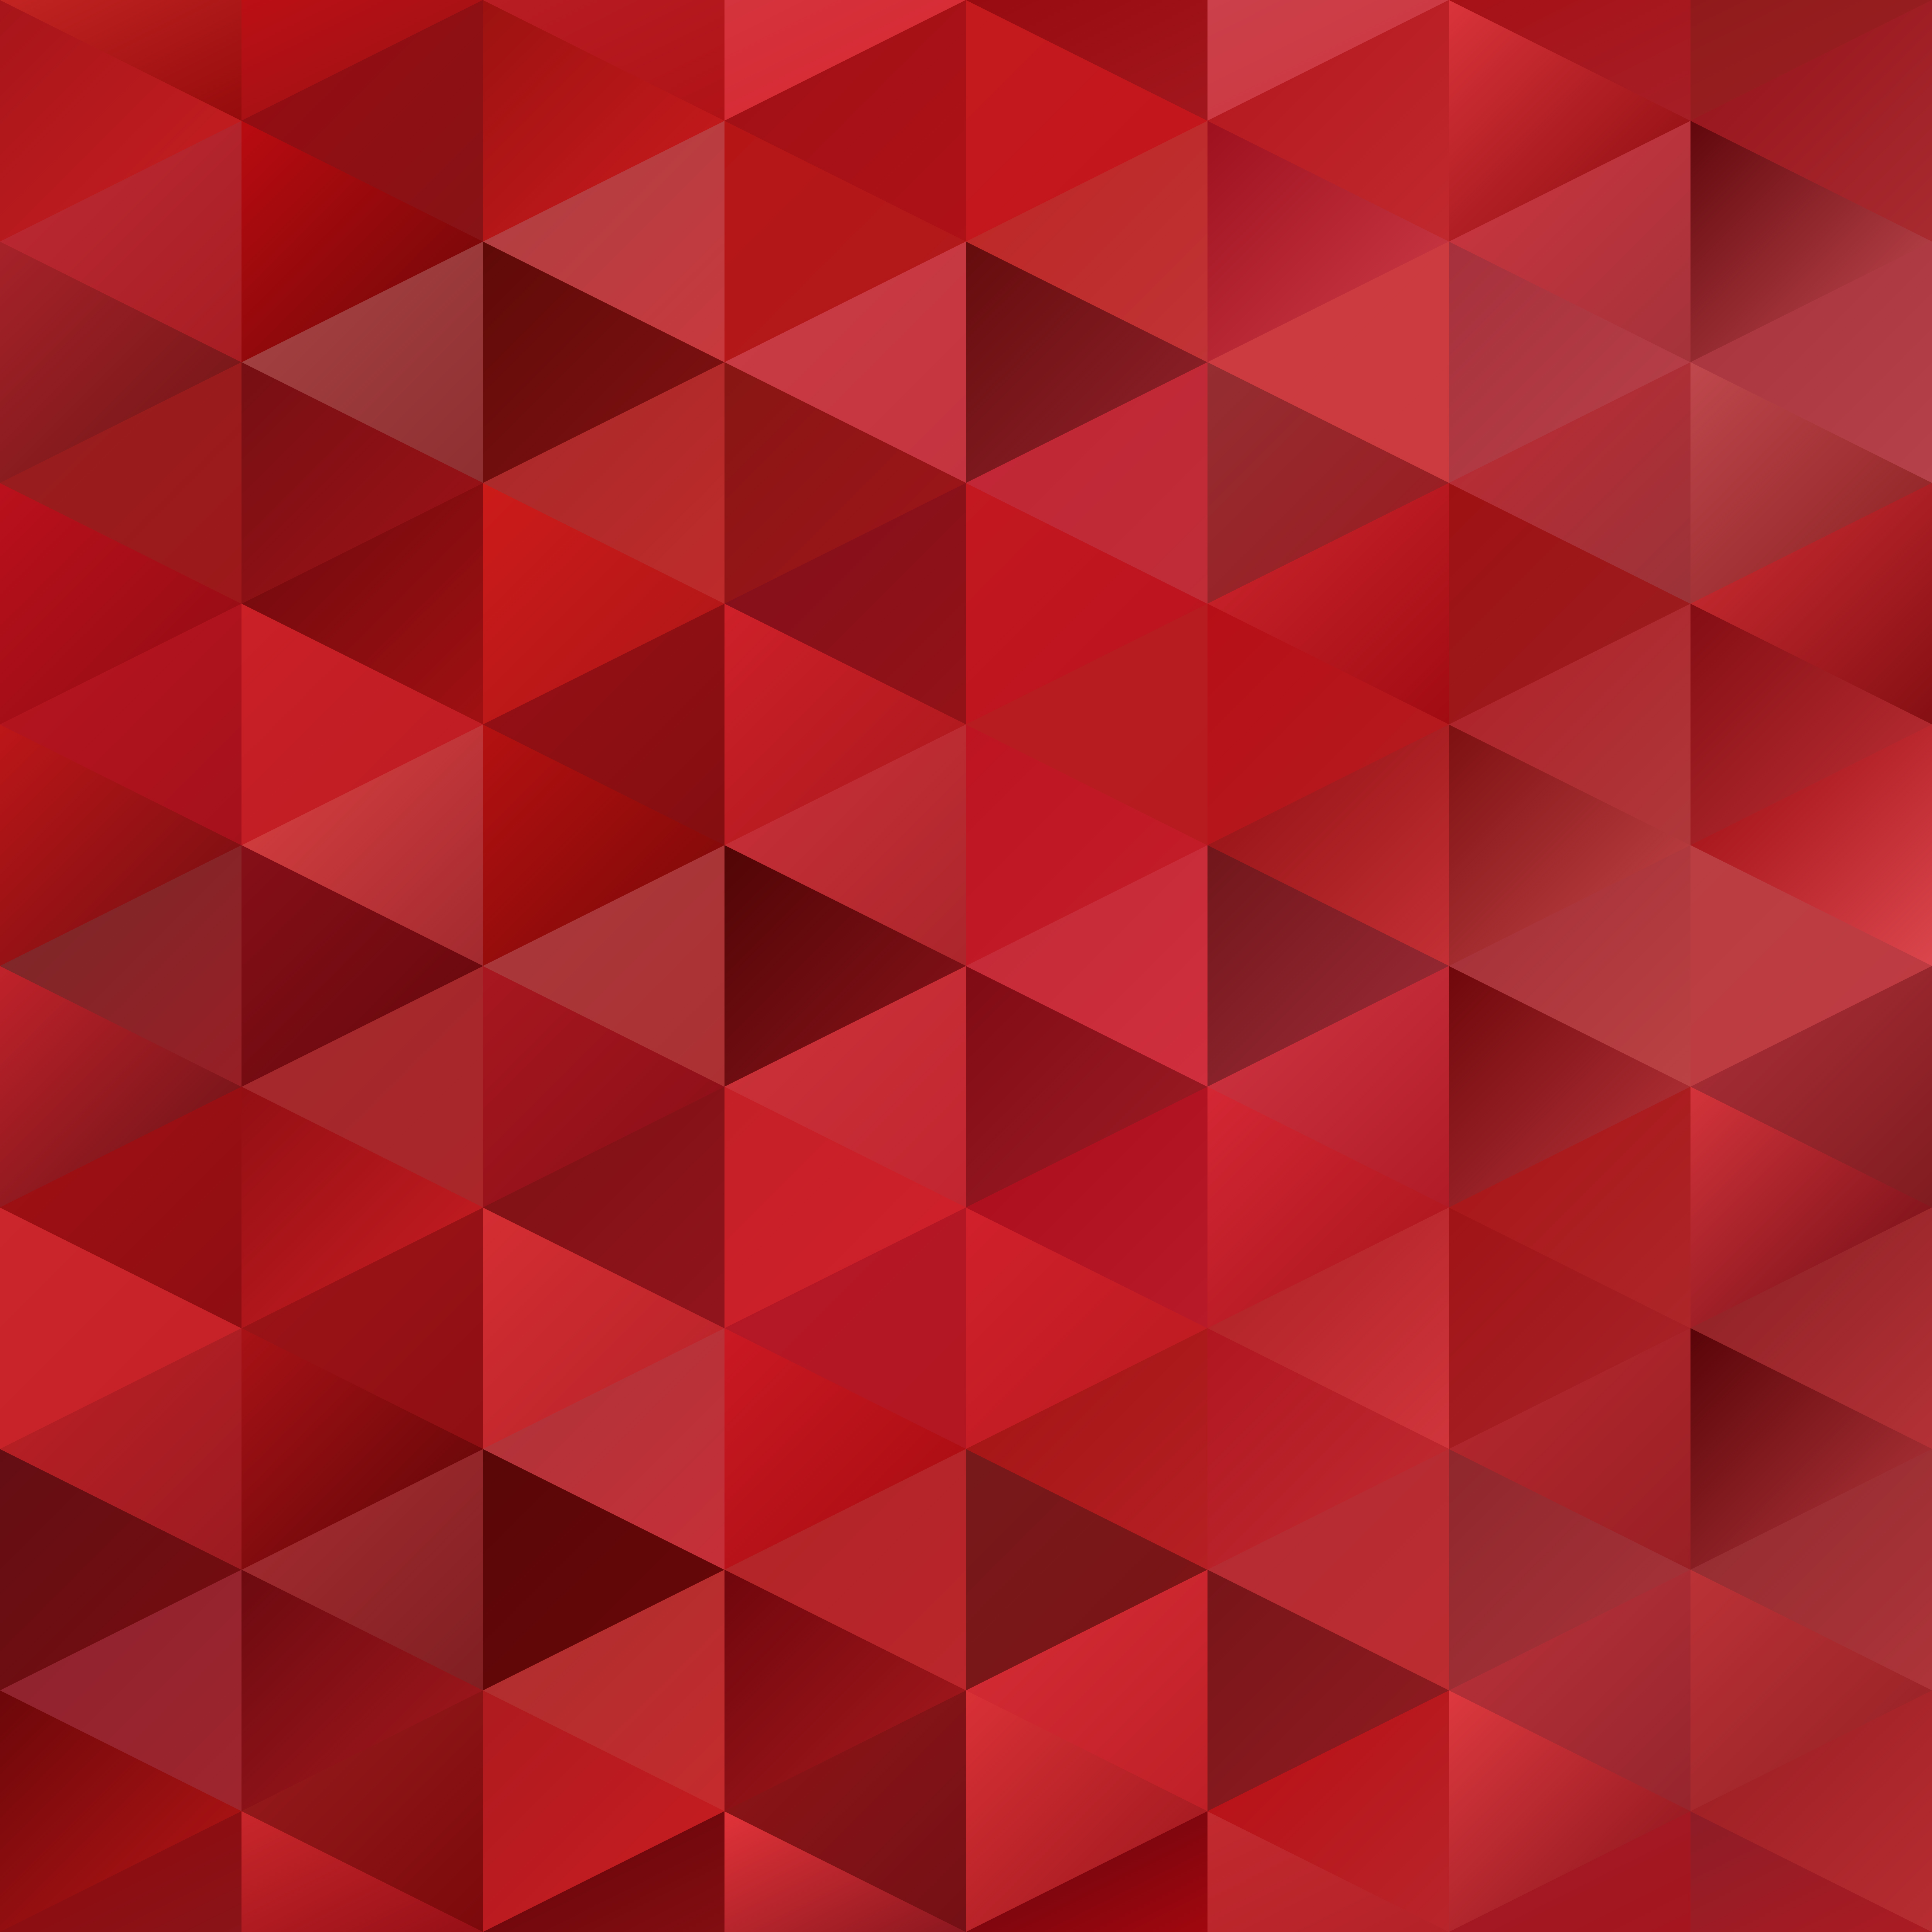 Red Grid Mosaic Background, Creative Design Templates 631123 Vector Art